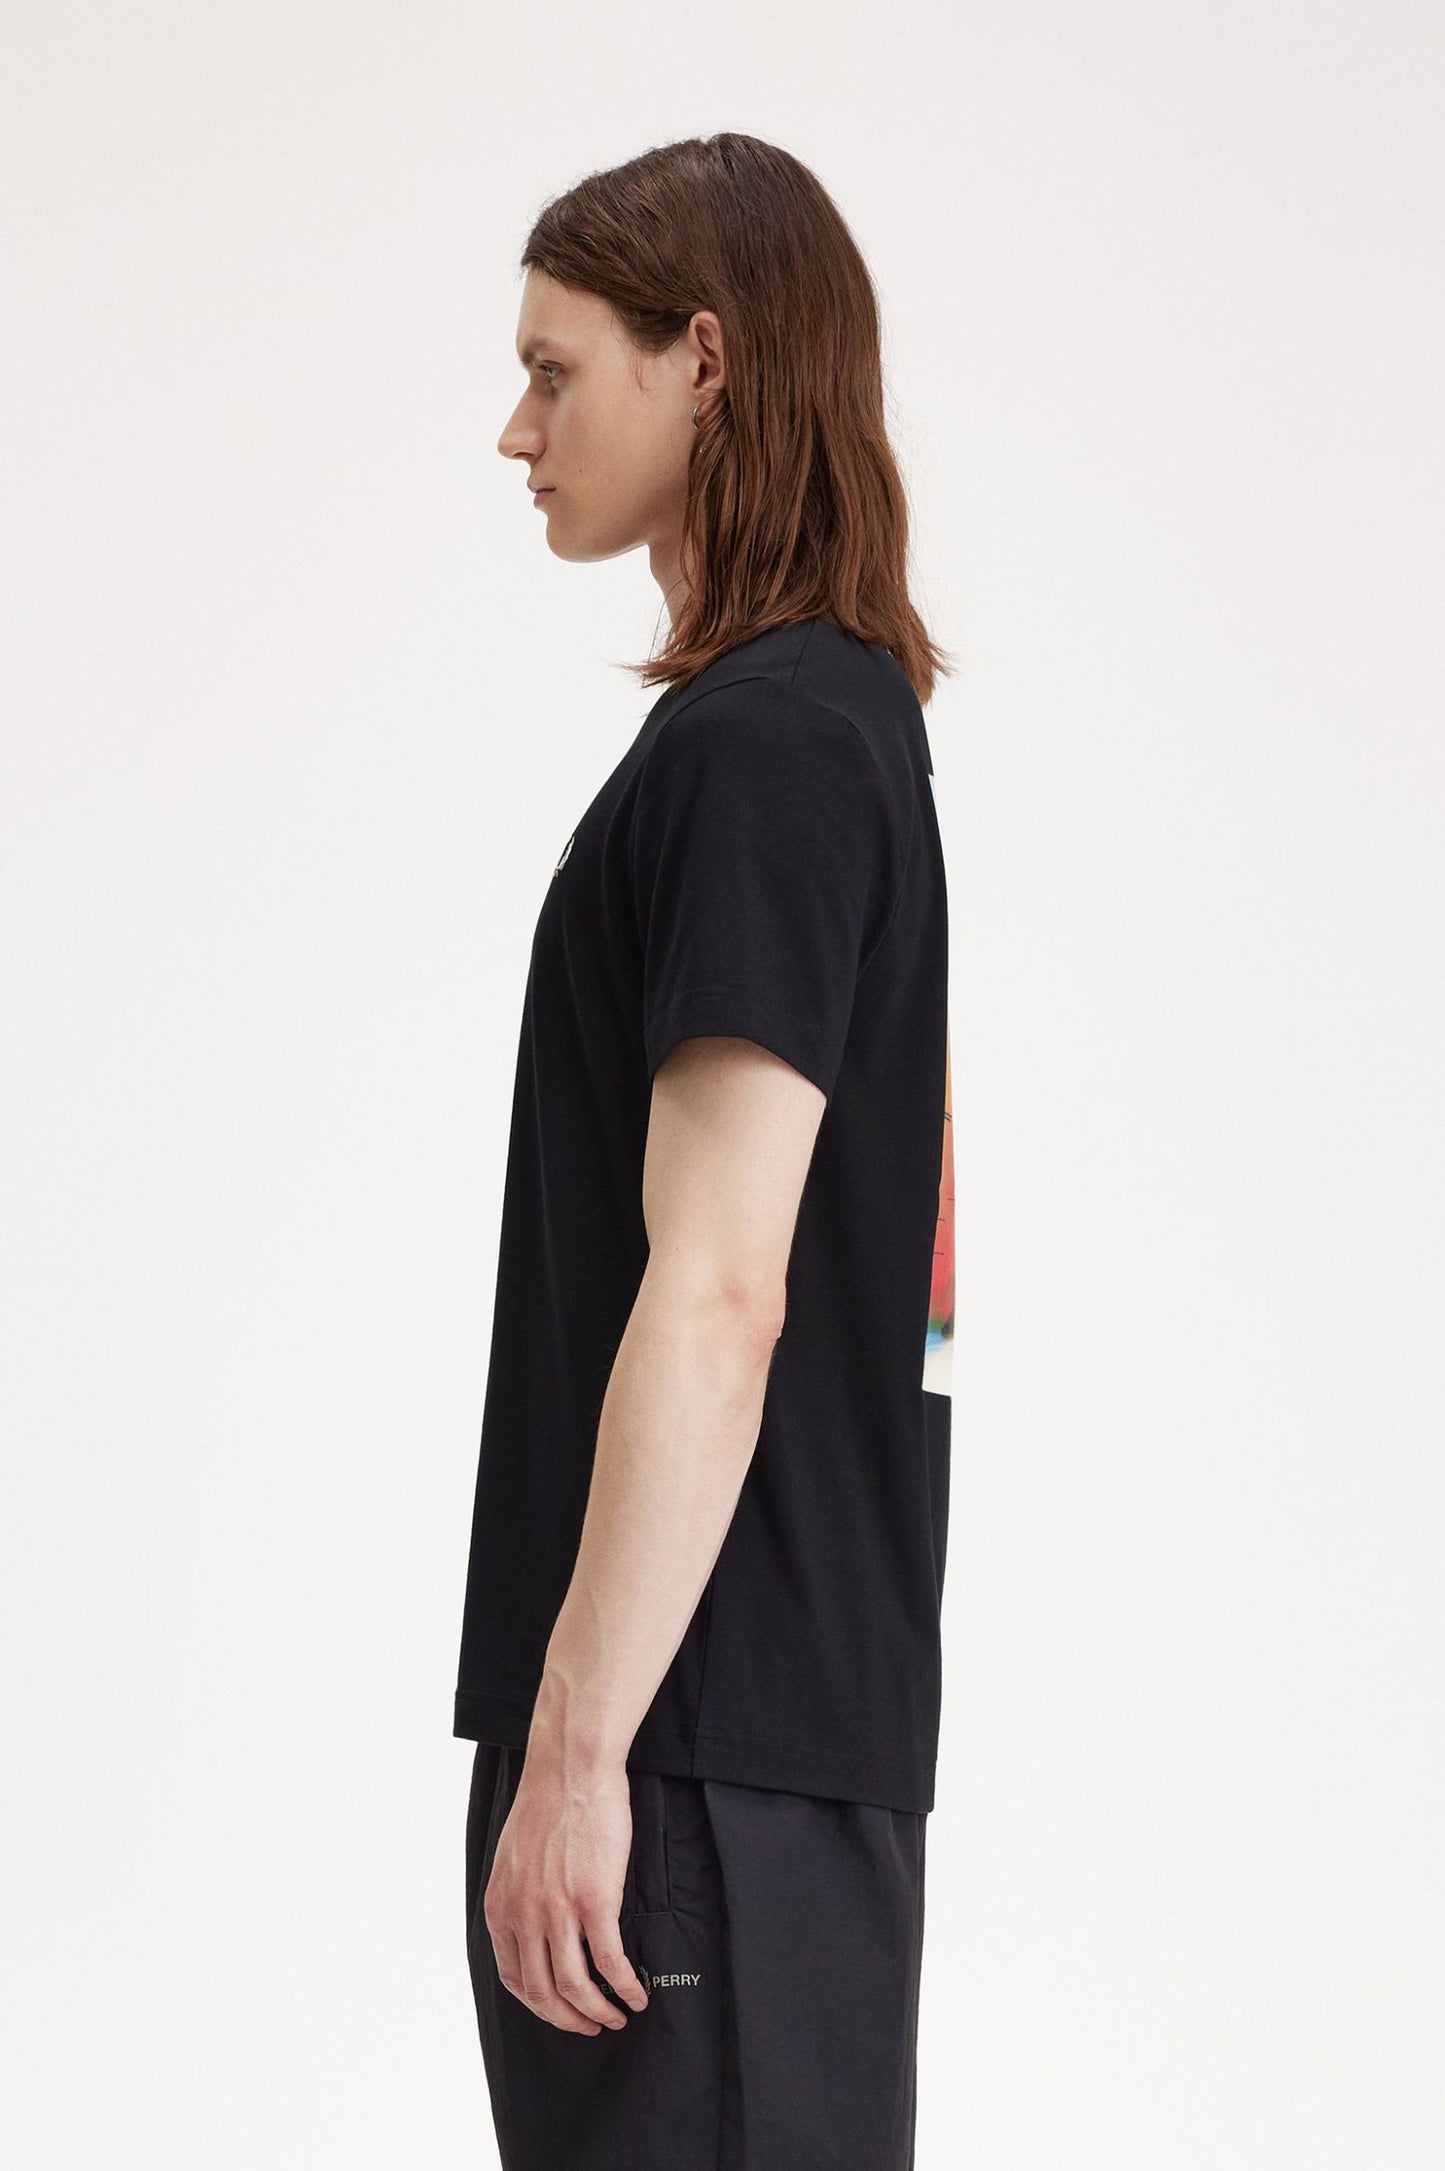 Fred Perry Abstract Graphic T-Shirt Black